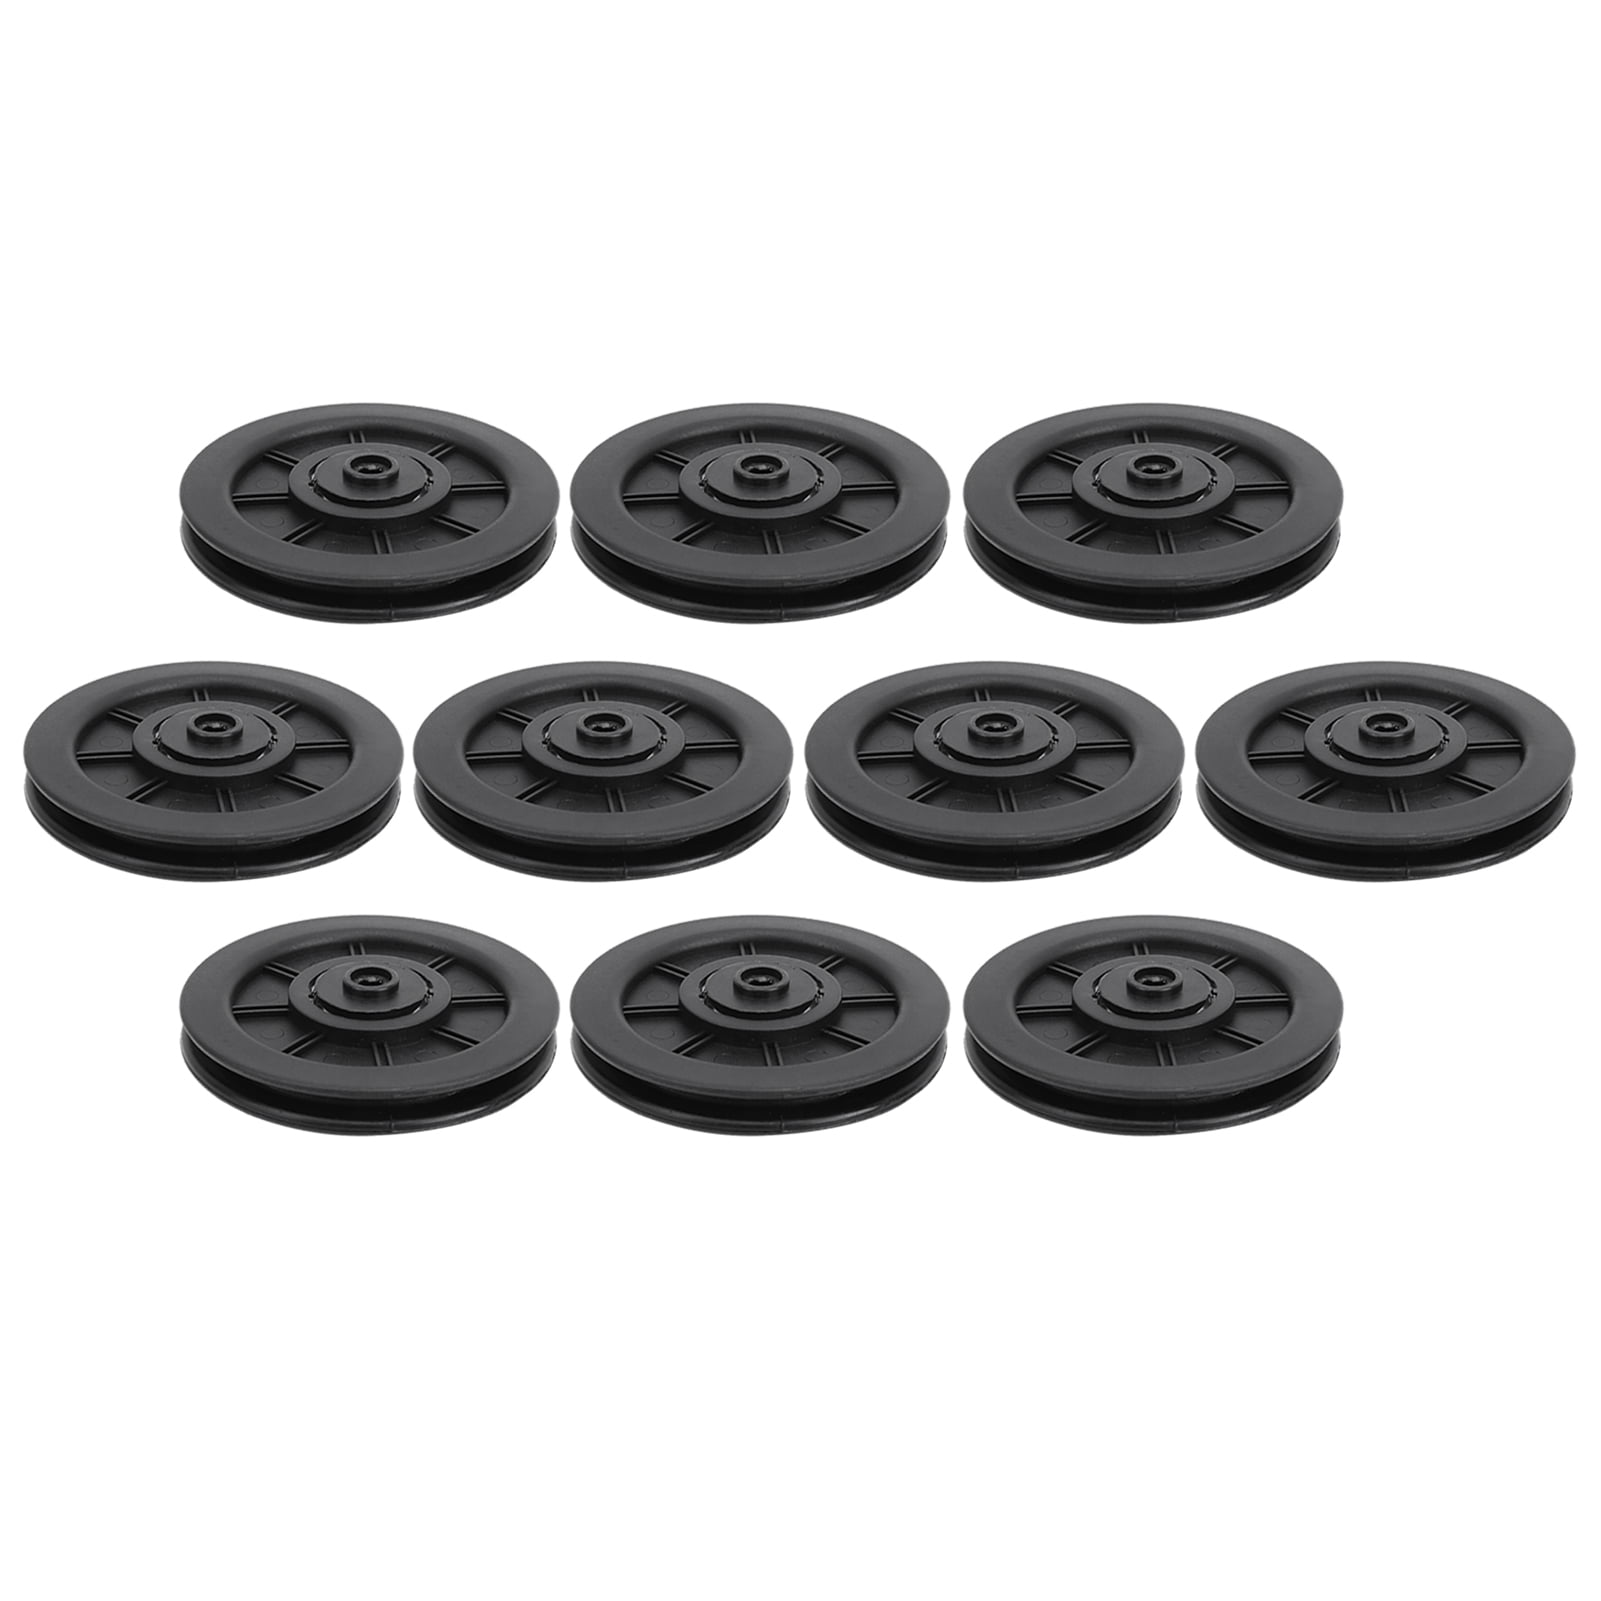 DAUERHAFT Nylon Bearing Pulley Wheel High Safety Performance 10Pcs/Set 100MM,Necessity Replacement for Fitness Equipment 